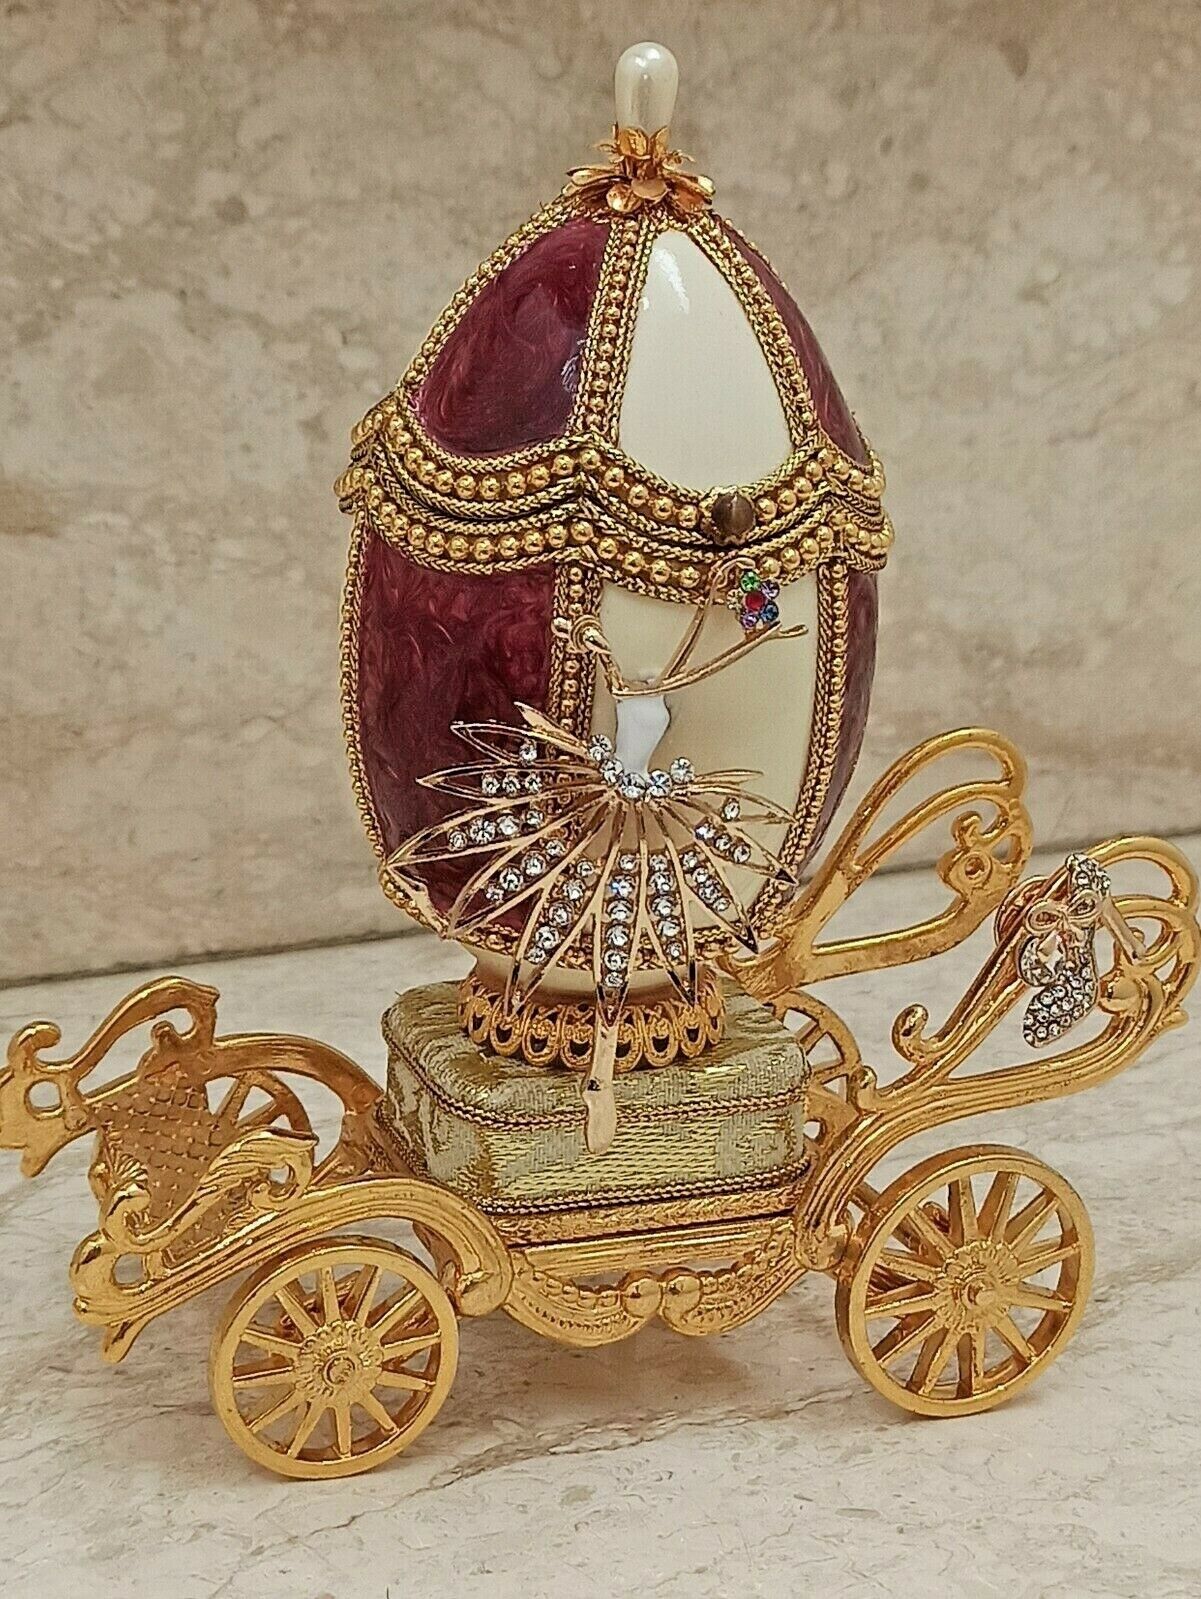 Luxury Mothers day gift Mom wife Faberge trinket box Music 24k GOLD Natural egg